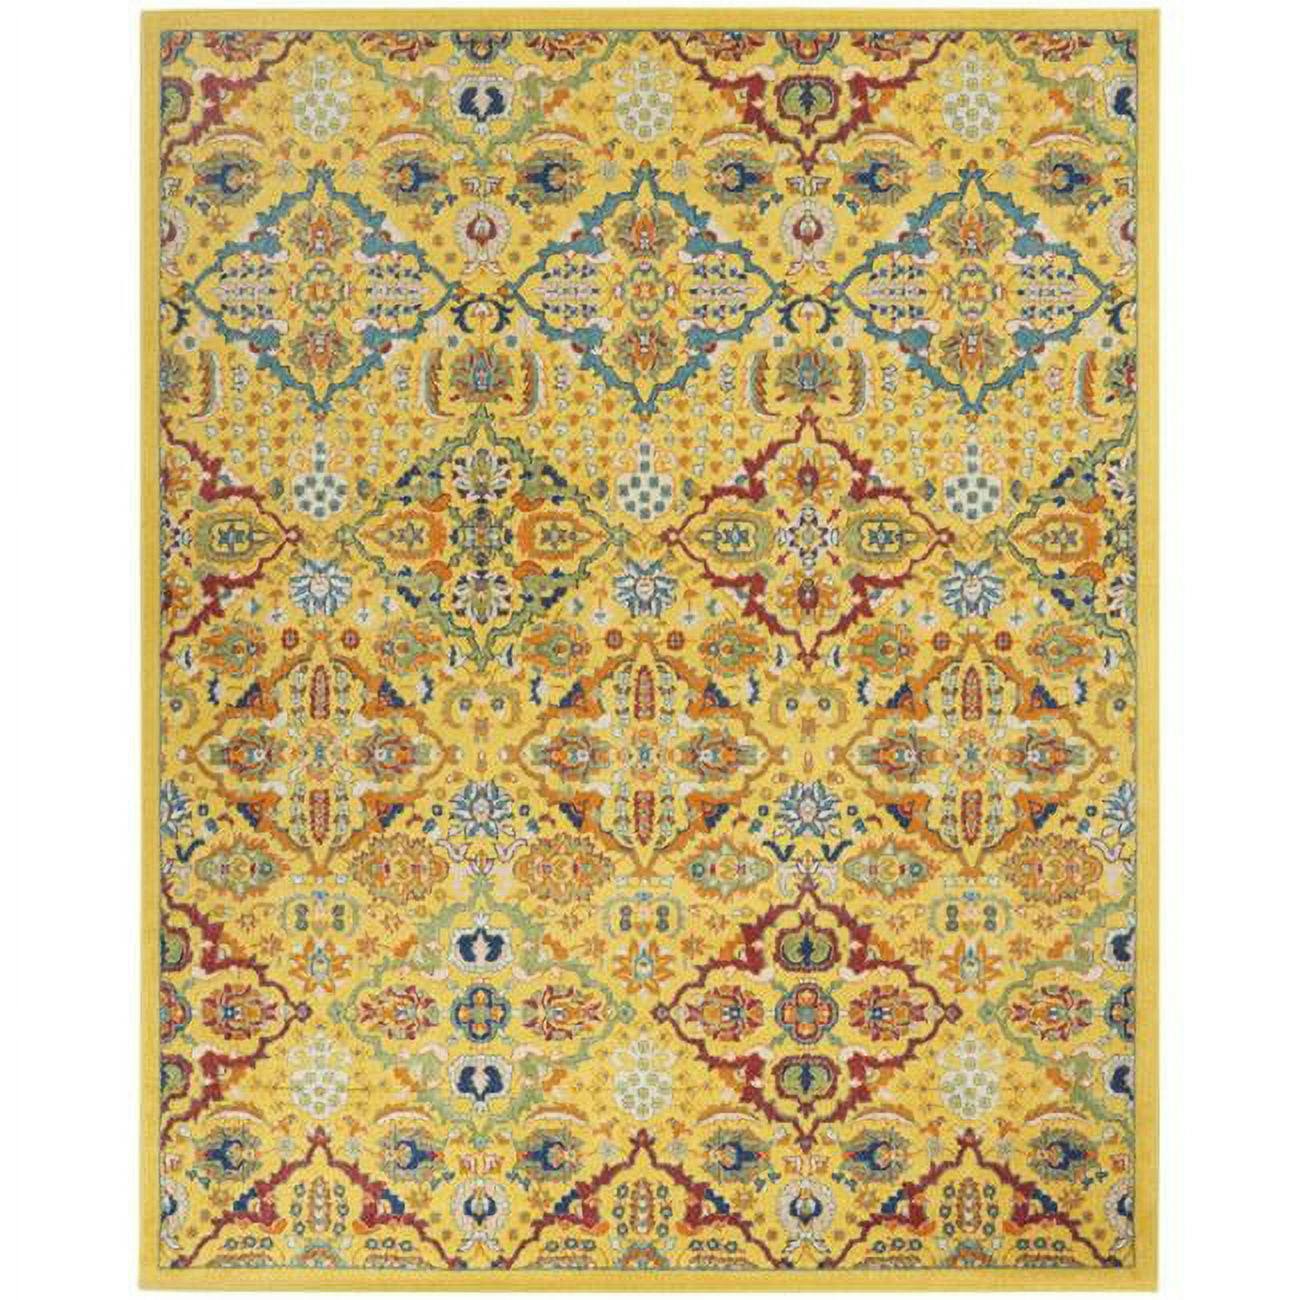 Bohemian Bliss Yellow Floral 9' x 12' Low-Pile Area Rug